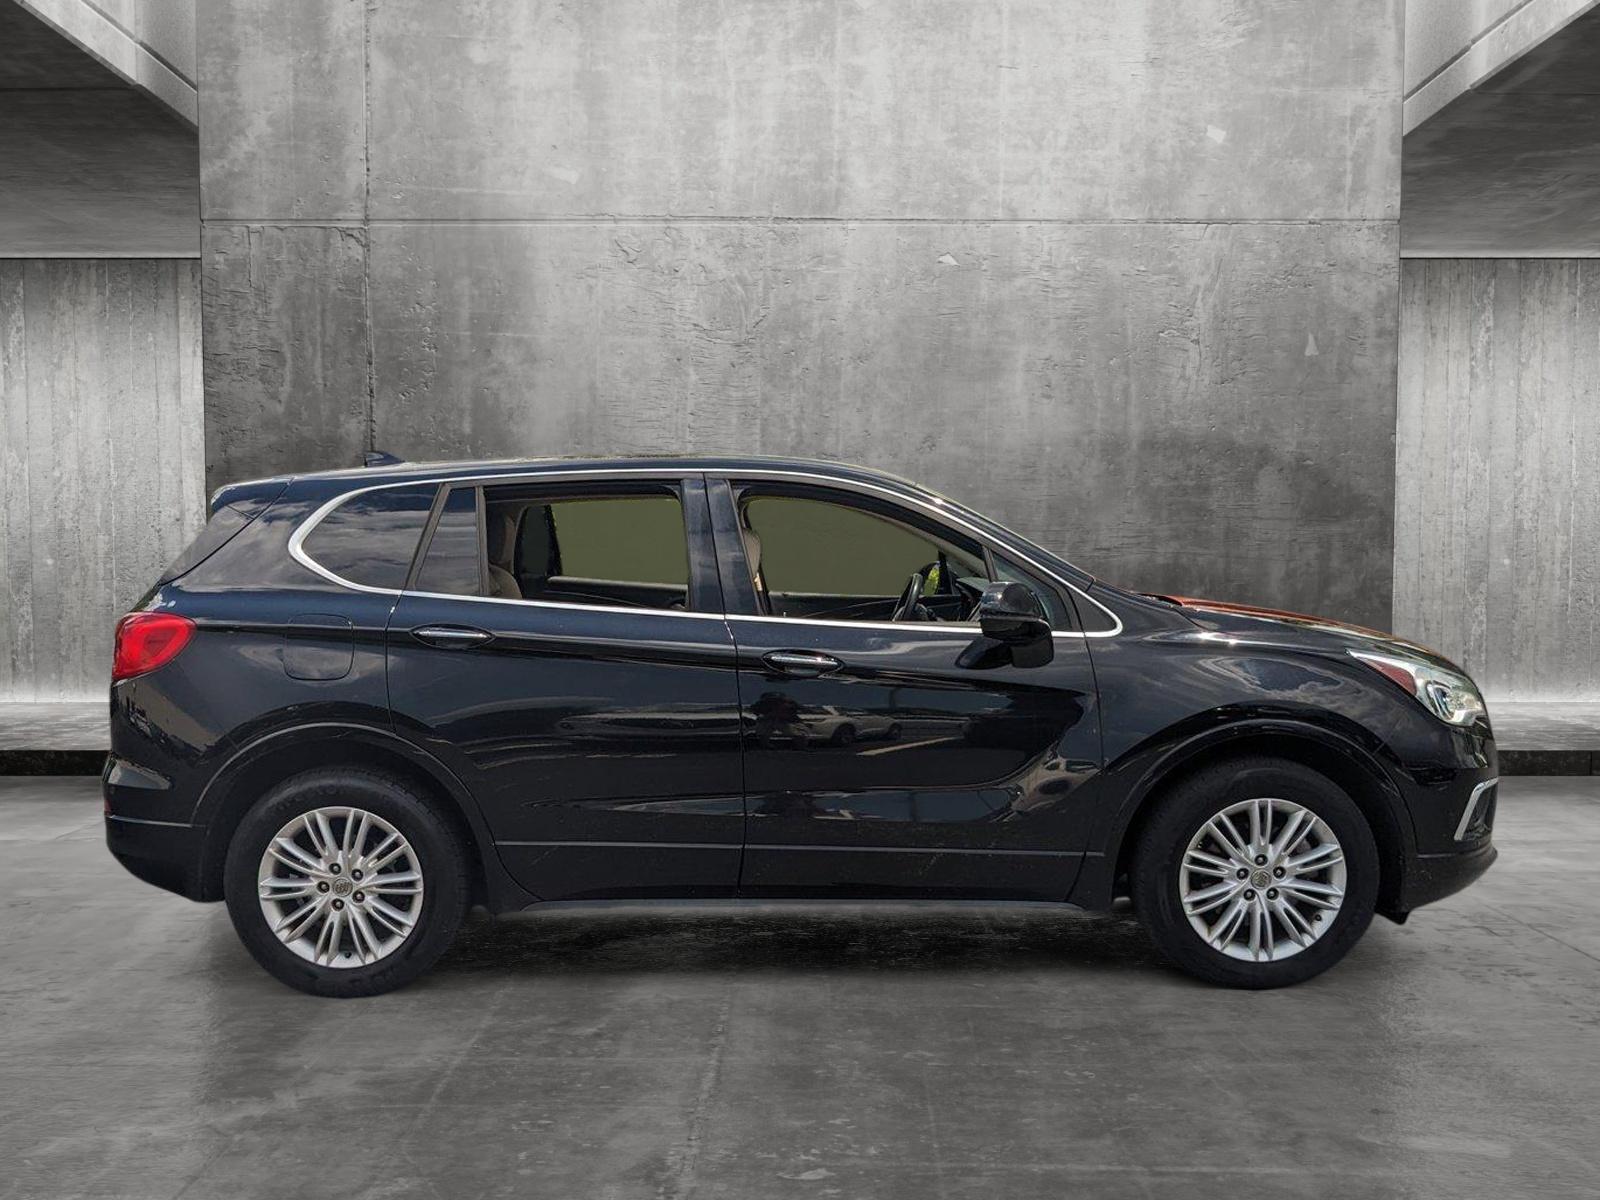 2017 Buick Envision Vehicle Photo in Sanford, FL 32771